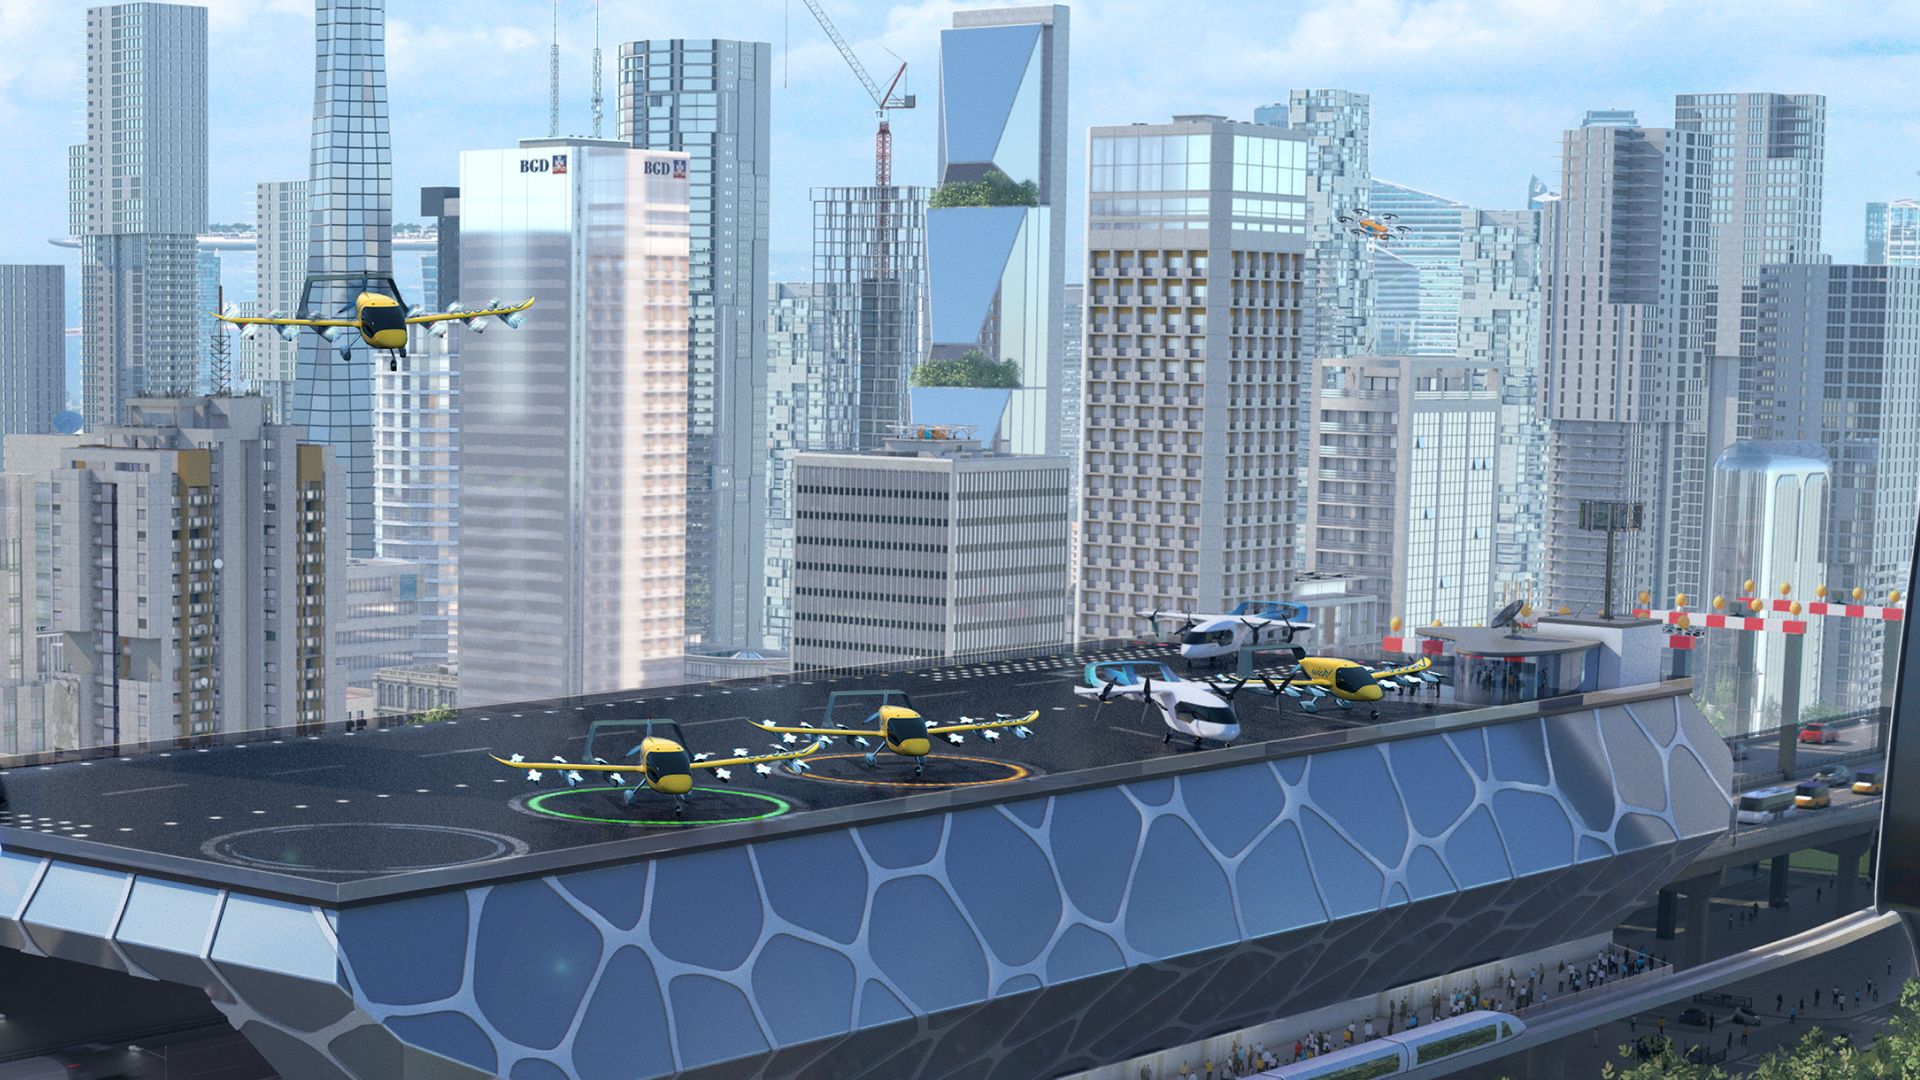 Rendering of a potential vertiport for Wisk's autonomous flying taxis. 